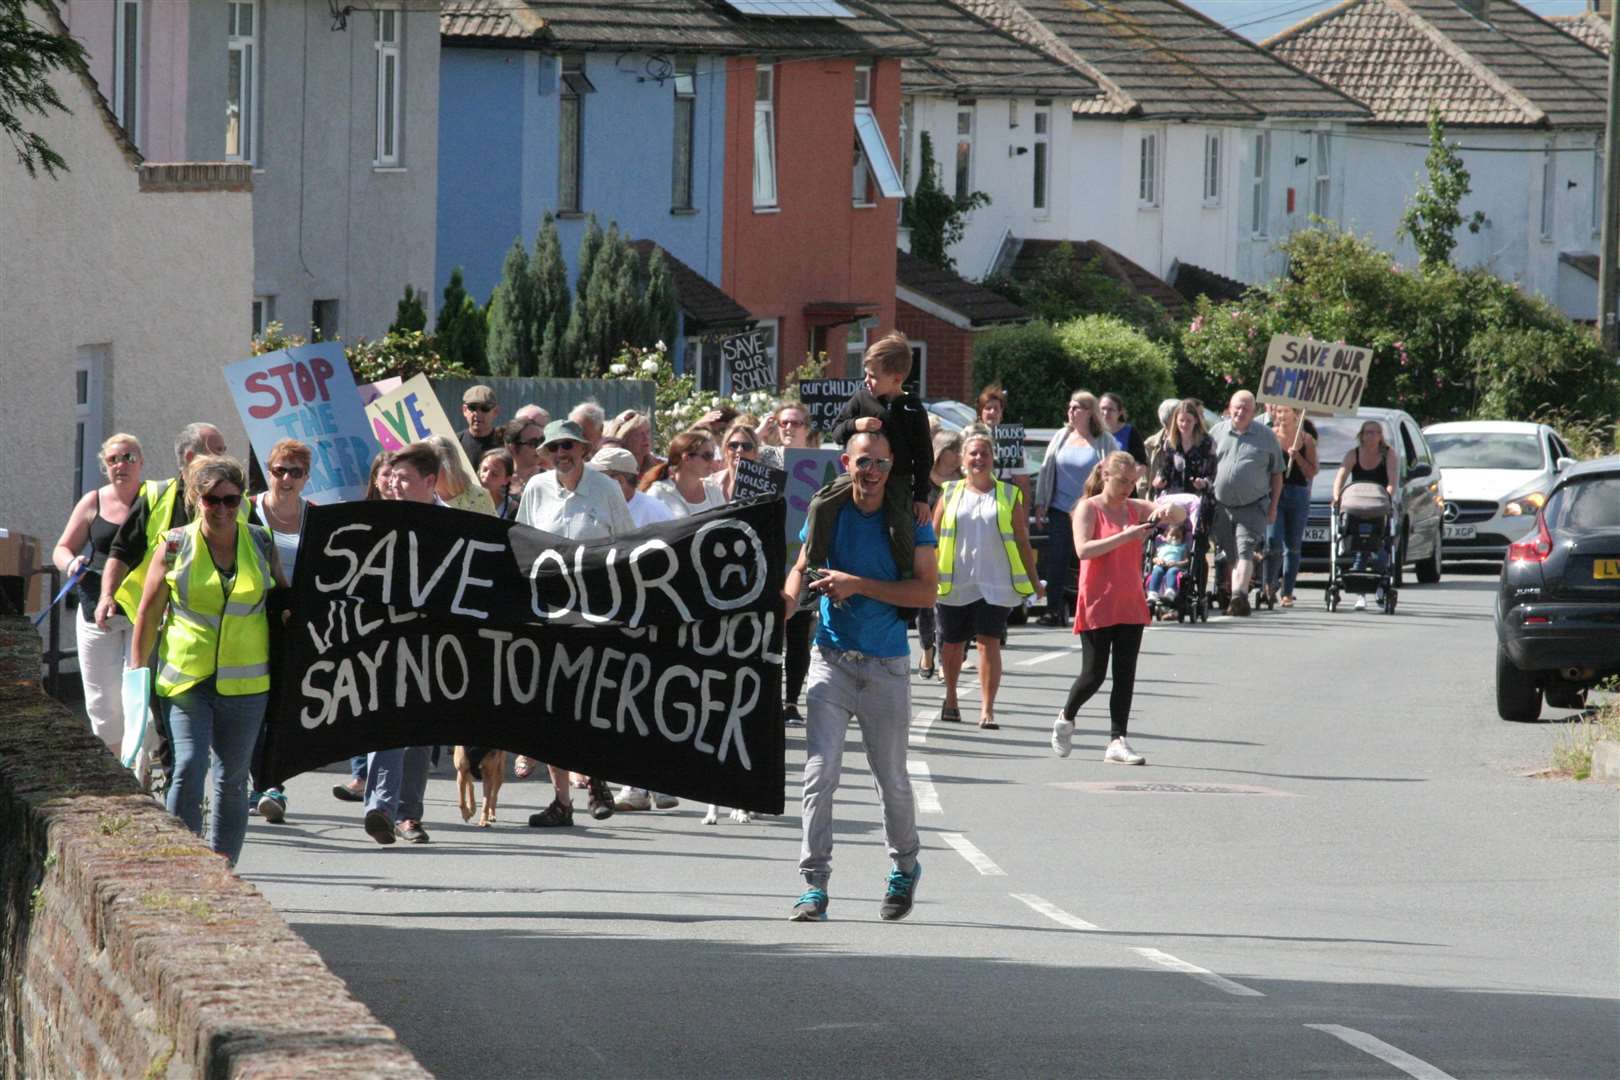 Protestors marched from Stoke Primary Academy to Allhallows Primary Academy to rally against merger plans in 2019